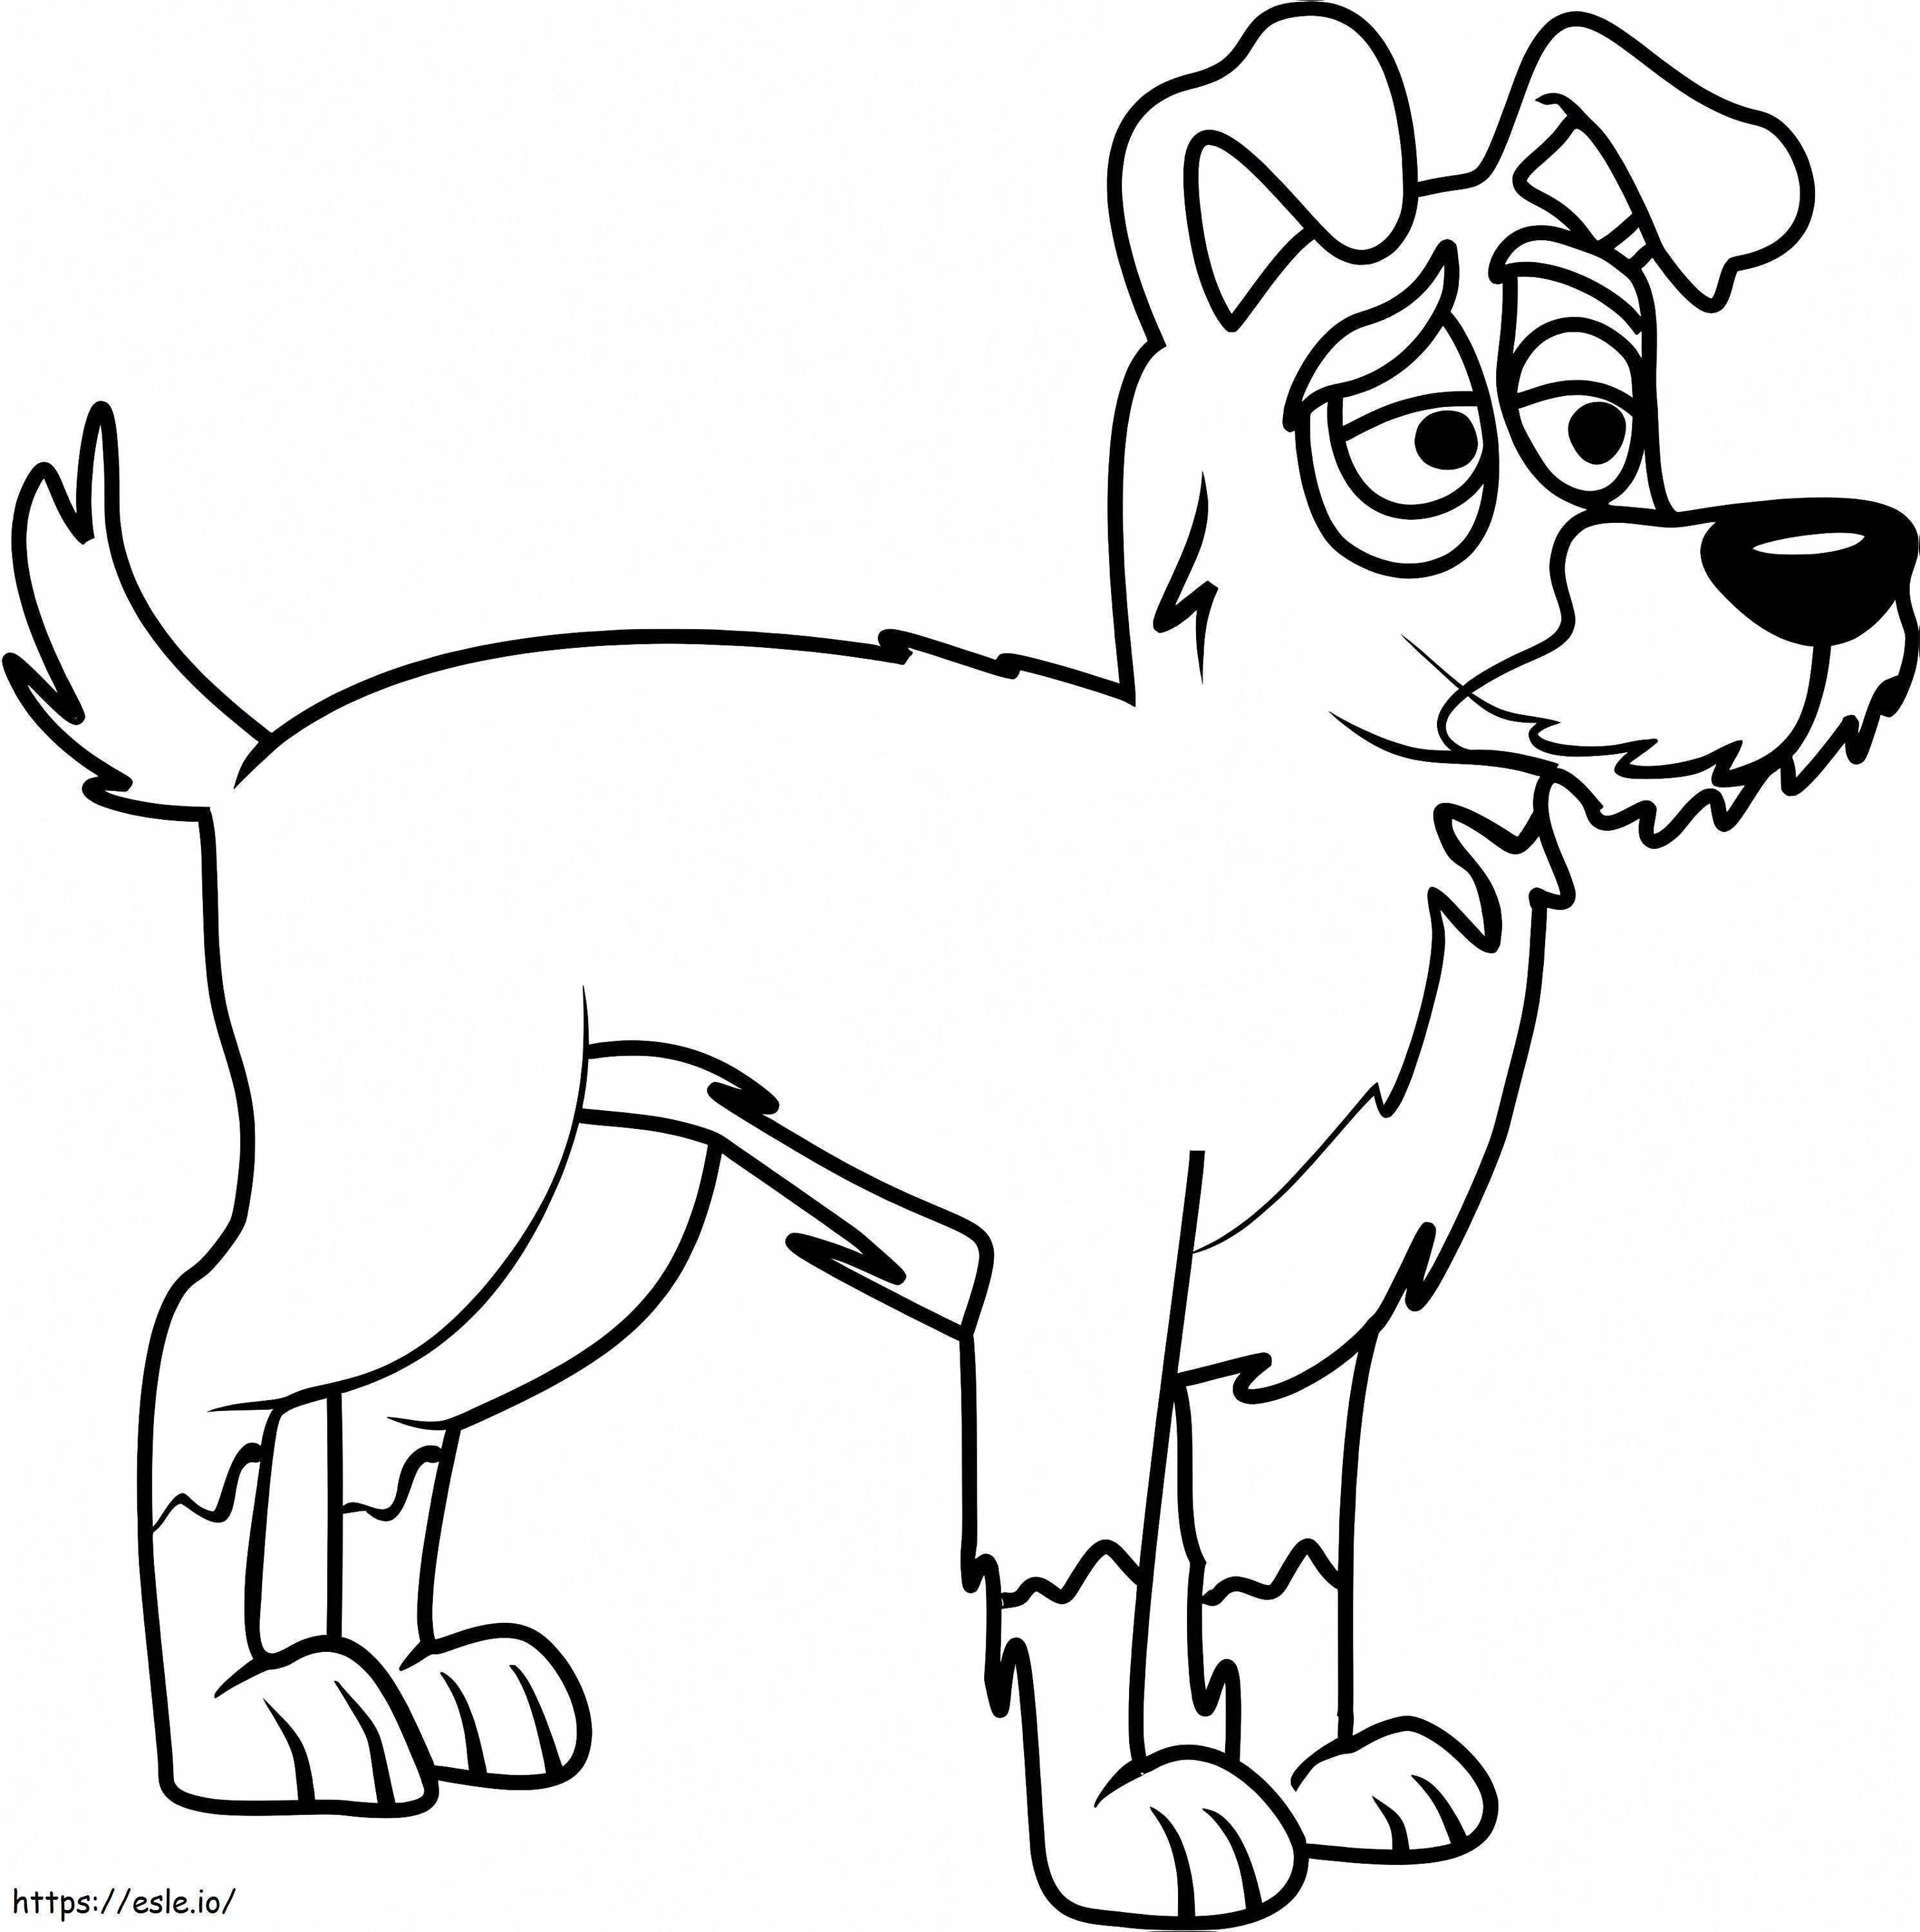 Slick From Pound Puppies coloring page